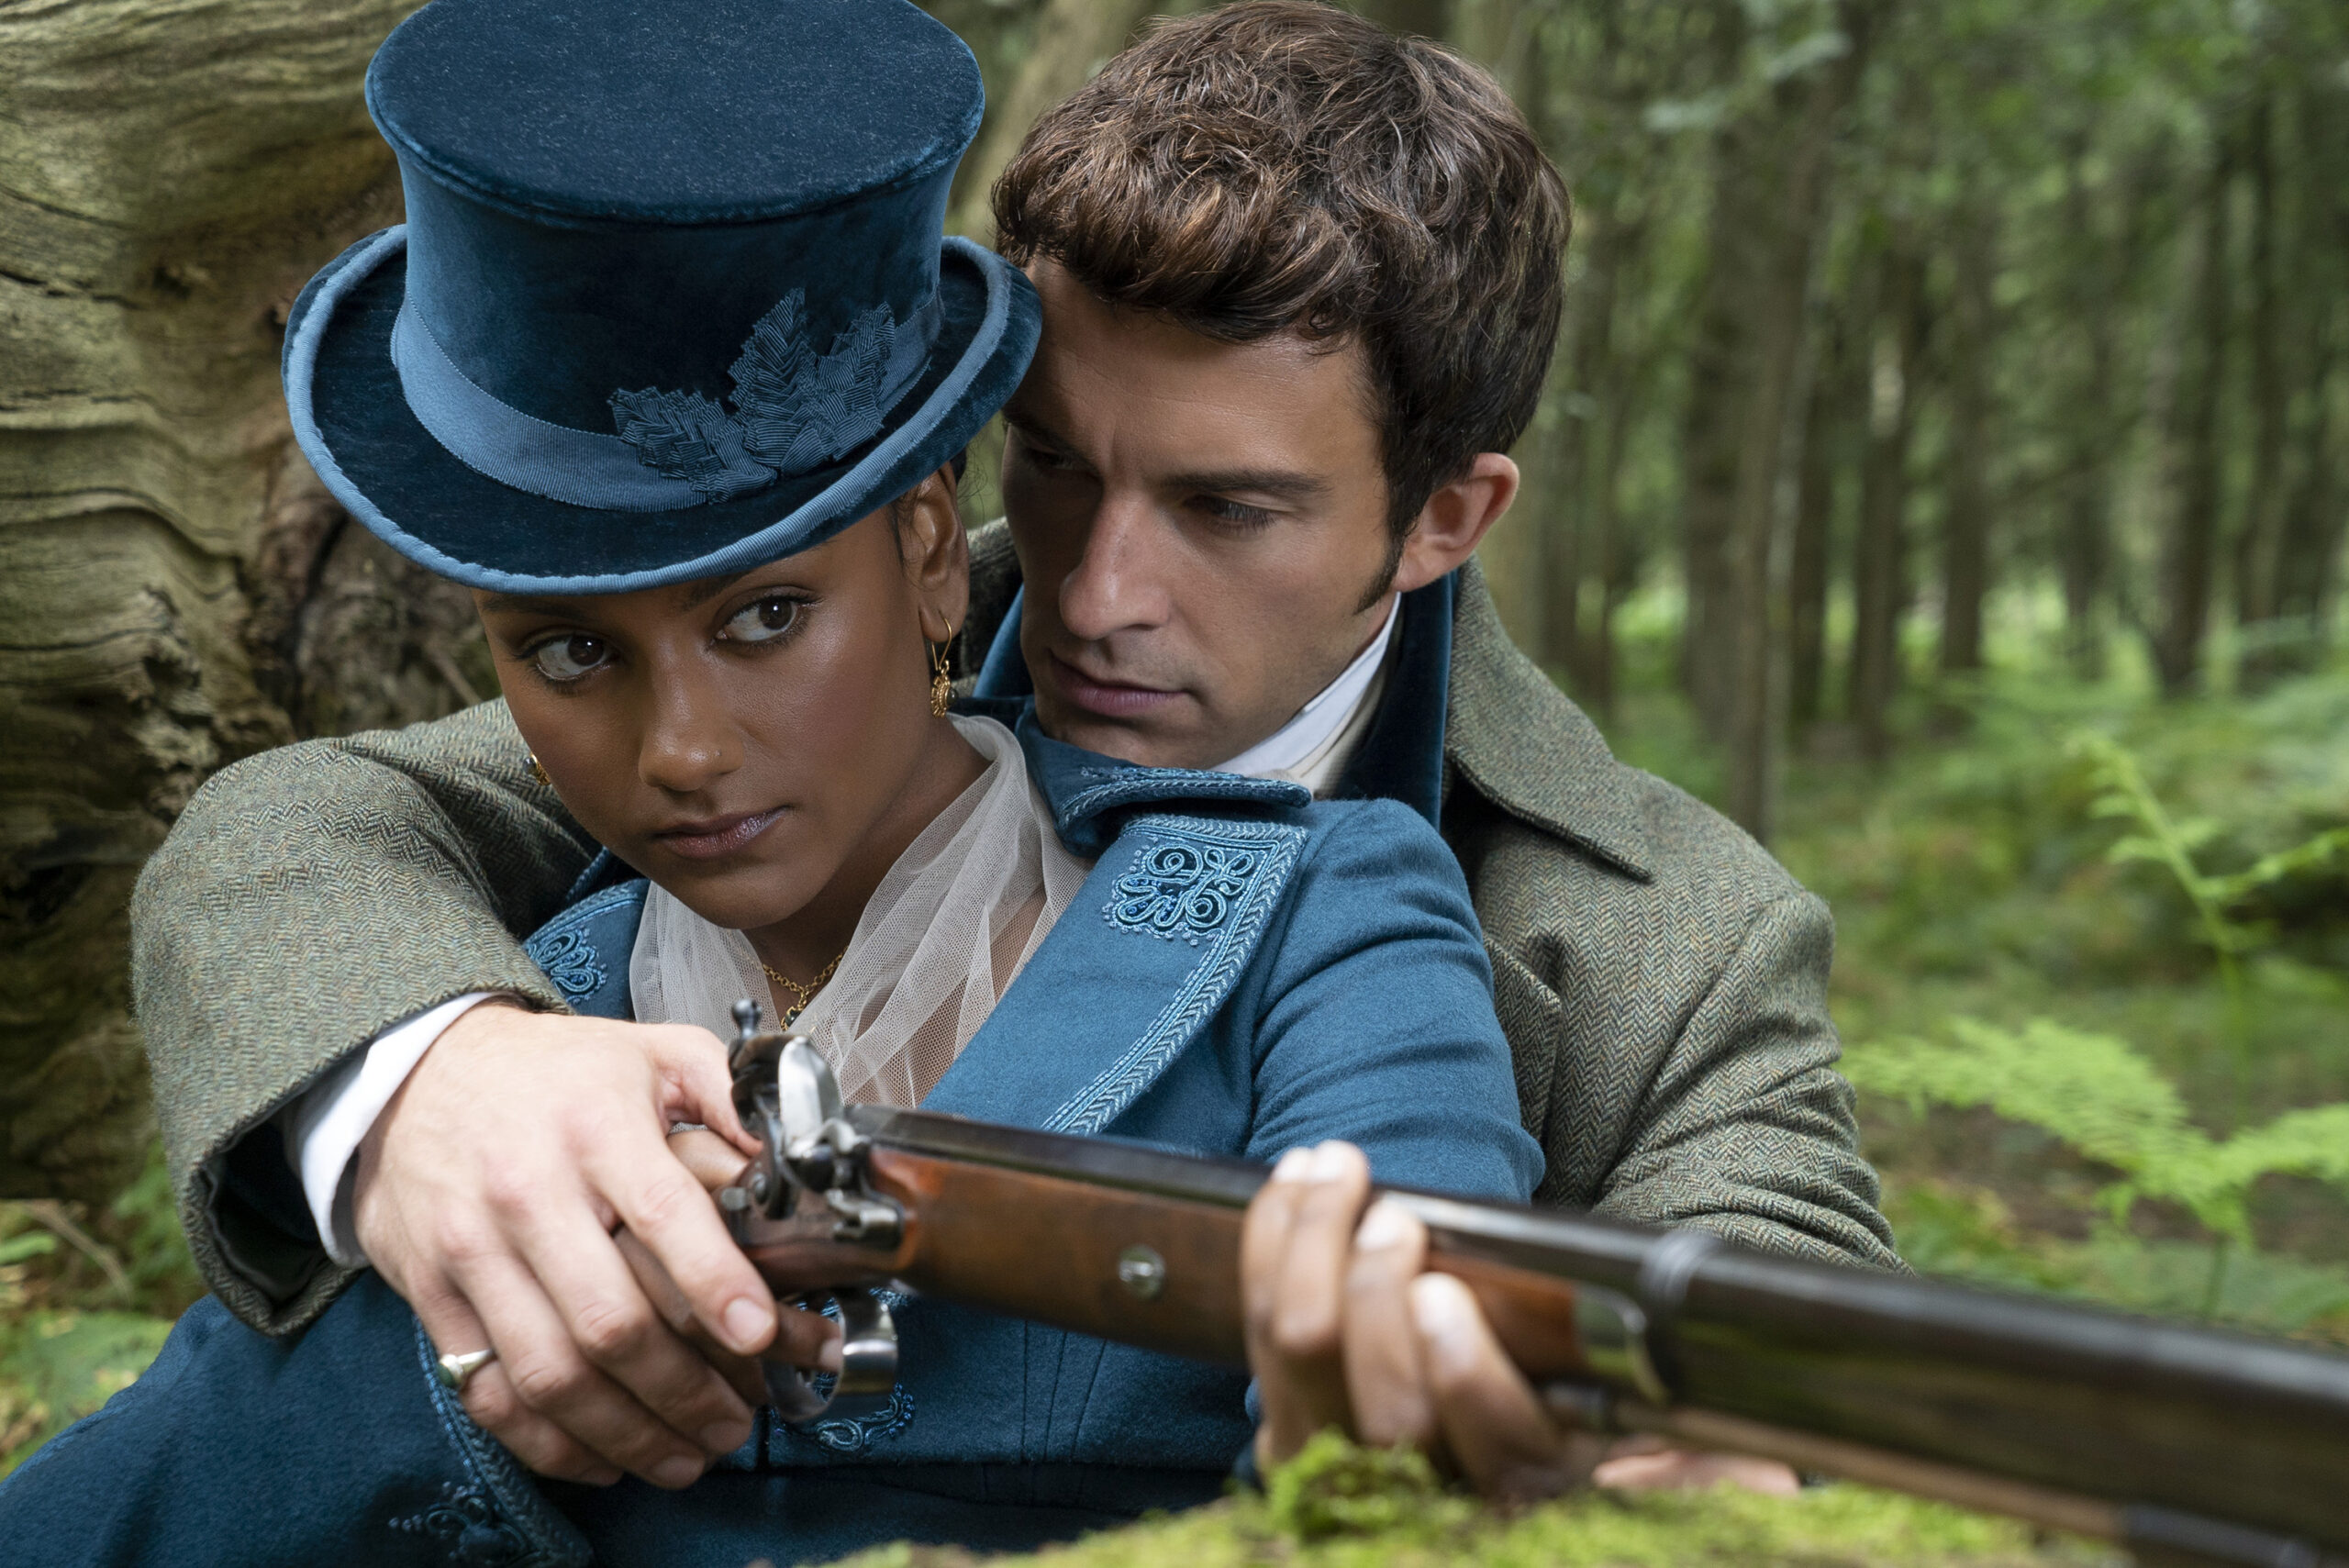 A woman holds and aims a musket rifle while a man holds her hand and rifle with his face close to her neck. She wears a blue top hat and coat, and he wears a grey jacket.